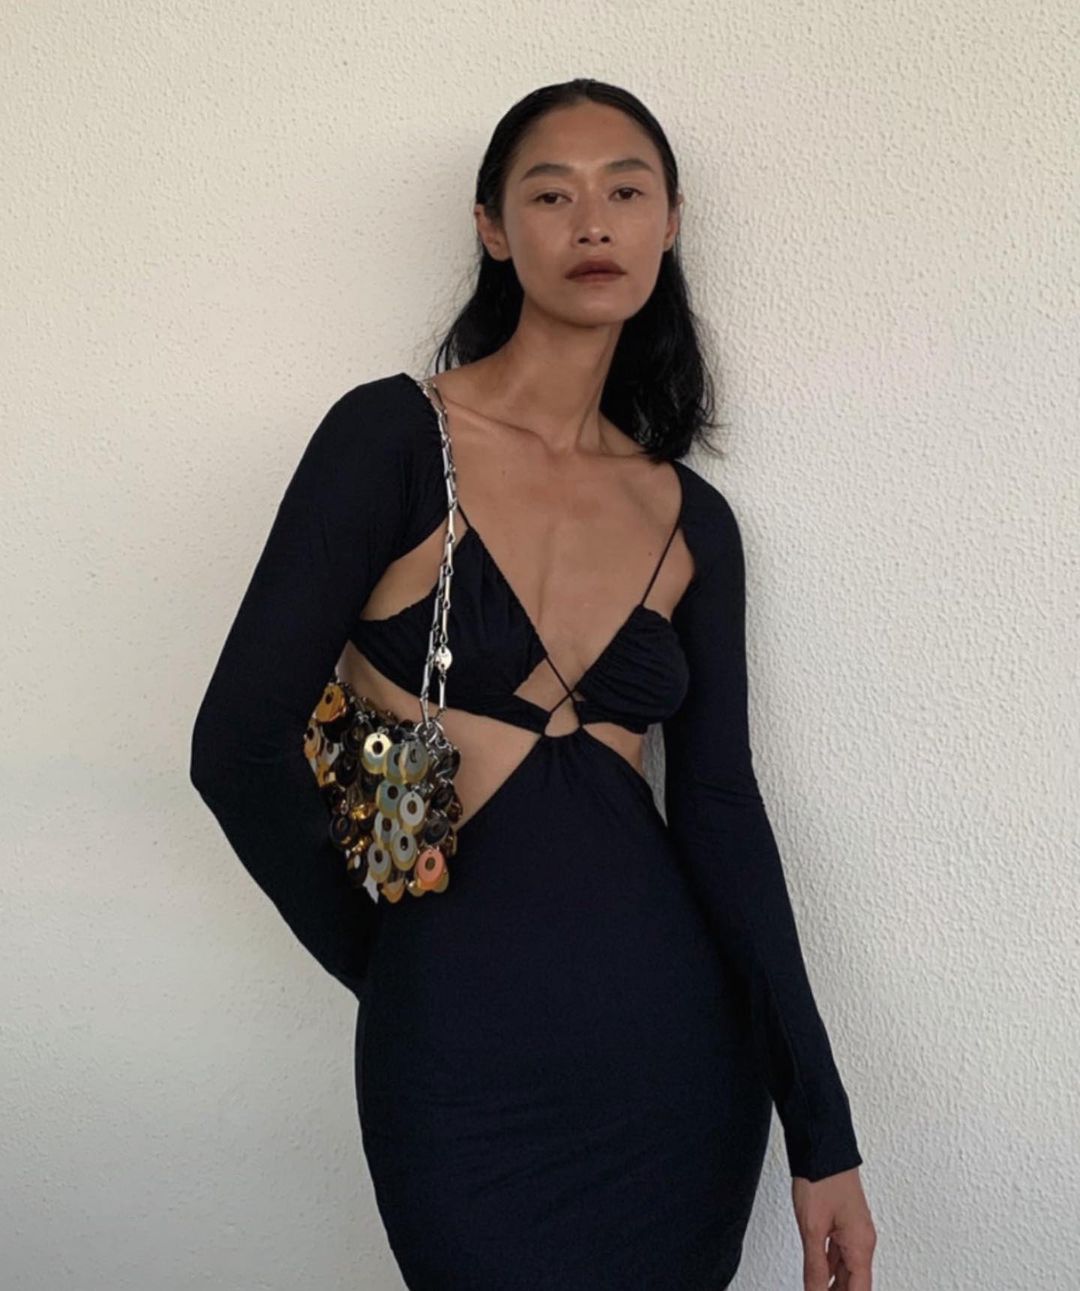 amazuin.swim 248052857 581816056485075 2483329361644691666 n The Spring-Summer Trends of 2022: Experimental, Ethical and Everlasting Styles!